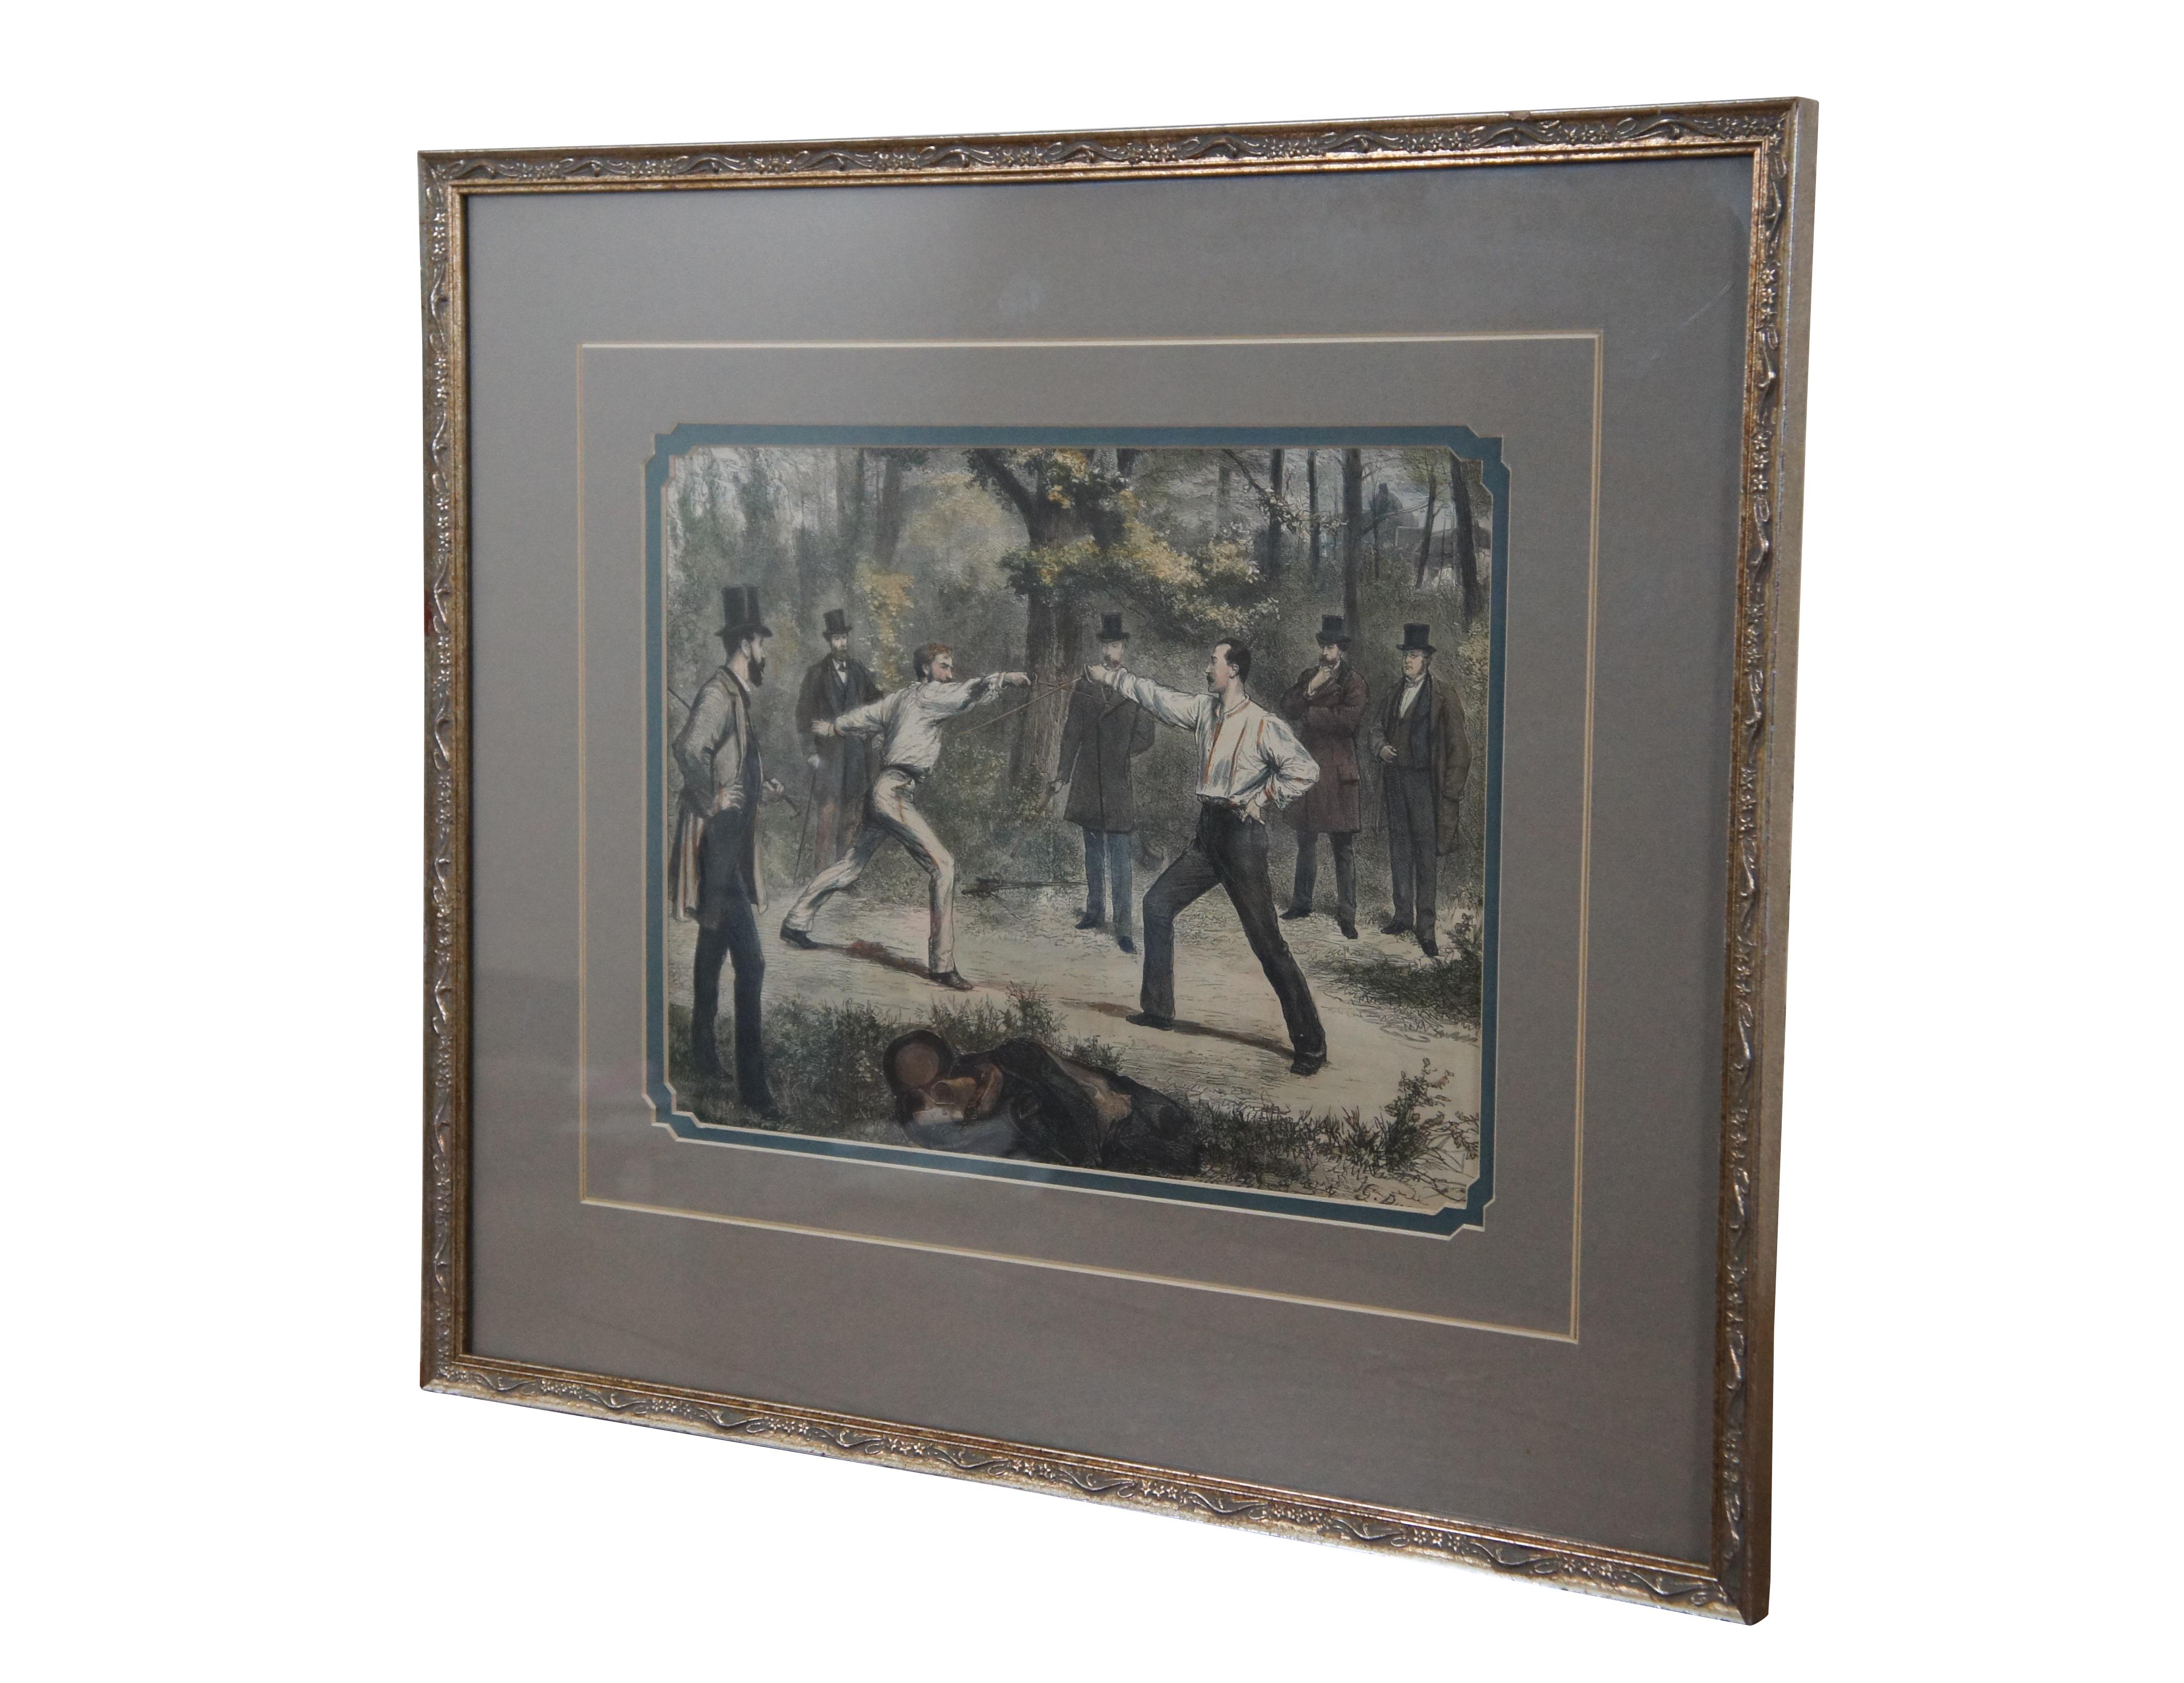 Framed late 19th century hand colored wood engraving depicting 